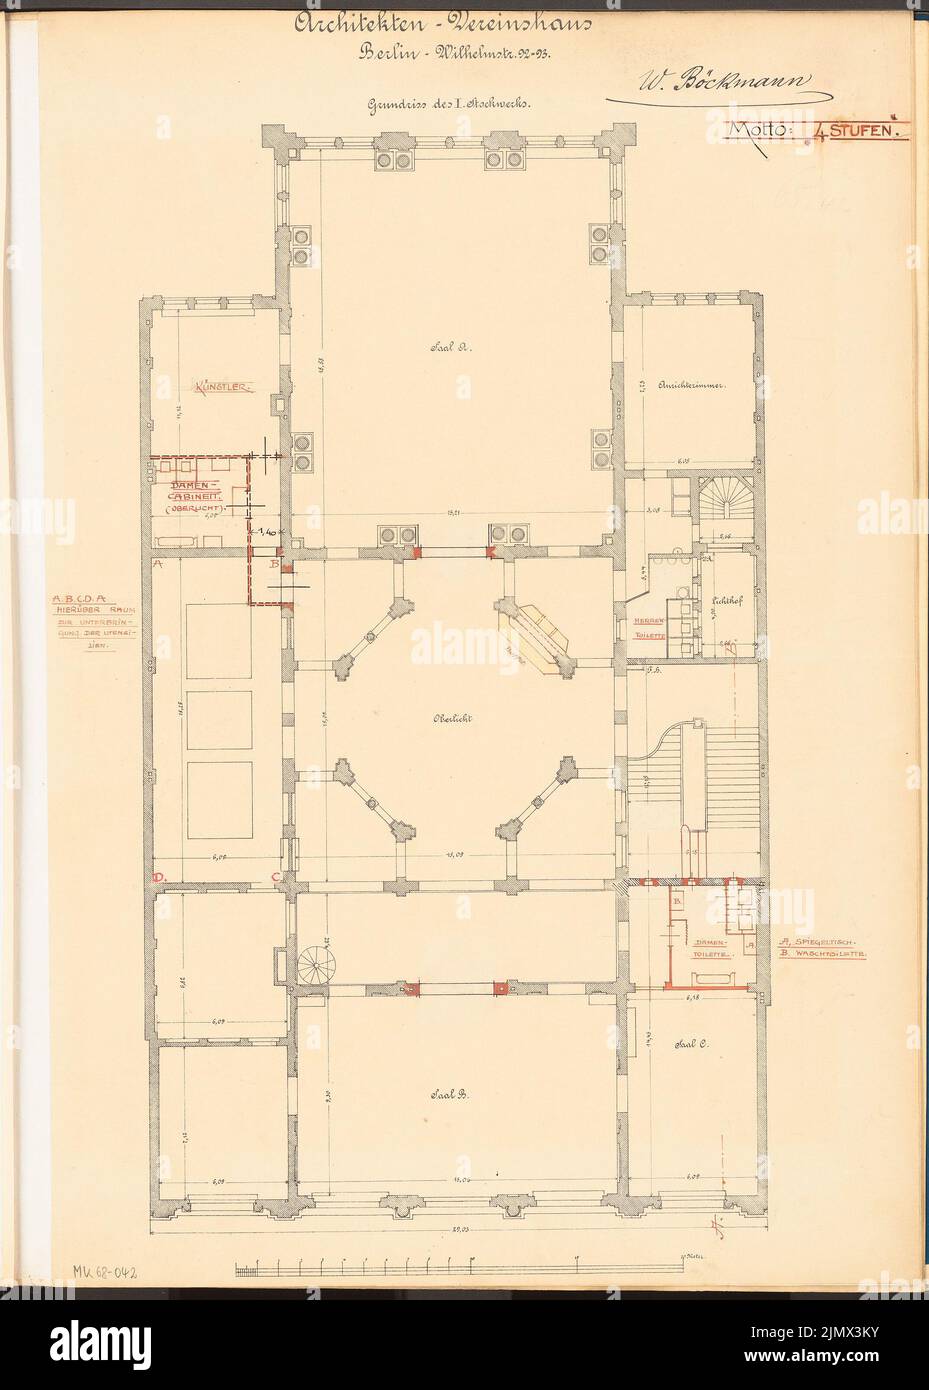 Böckmann Wilhelm (1832-1902), redesign of the upper rooms of the club house of the architect association in Berlin. Monthly competition February 1899 (02.1899): On the print: floor plan 1st floor of the house. Settings: variant of some rooms; Scale bar. Tusche watercolor via light pressure on paper, 60.8 x 43.5 cm (including scan edges) Böckmann Wilhelm  (1832-1902): Umgestaltung der oberen Räume des Vereinshauses des Architekten-Vereins zu Berlin. Monatskonkurrenz Februar 1899 Stock Photo